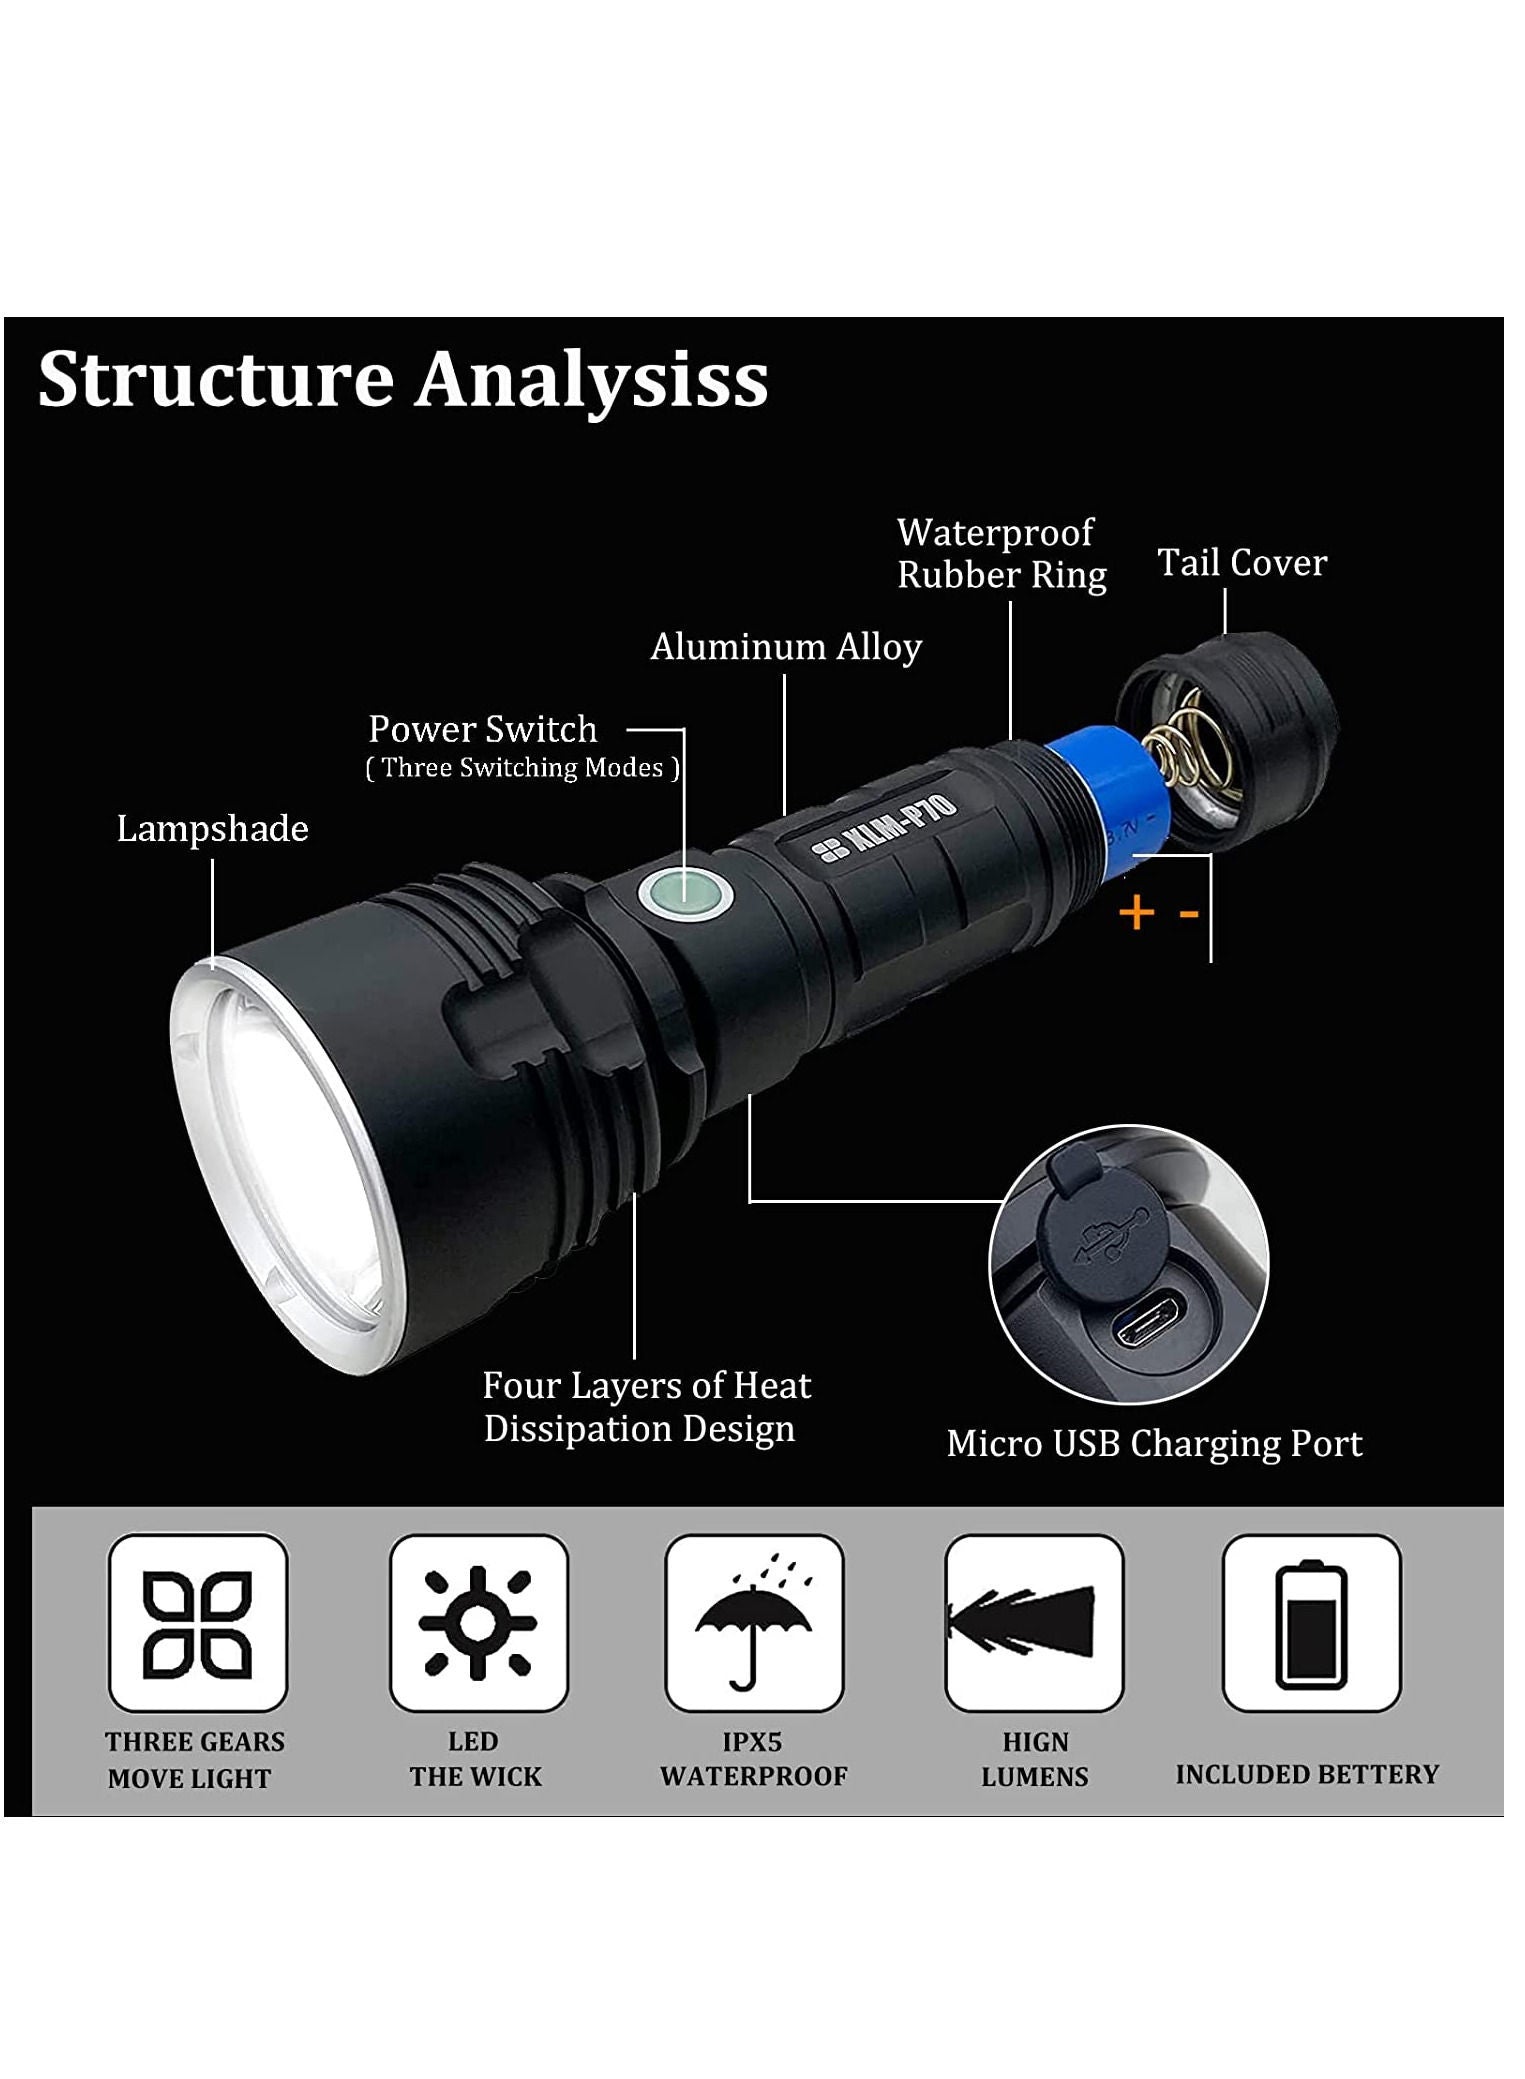 30000-100000 lumens Rechargeable led Tactical Flashlight£¬Super Bright 3 Modes Handheld Flashlights £¬Brightest Powerful 50W XLM-P70 LED USB Torch